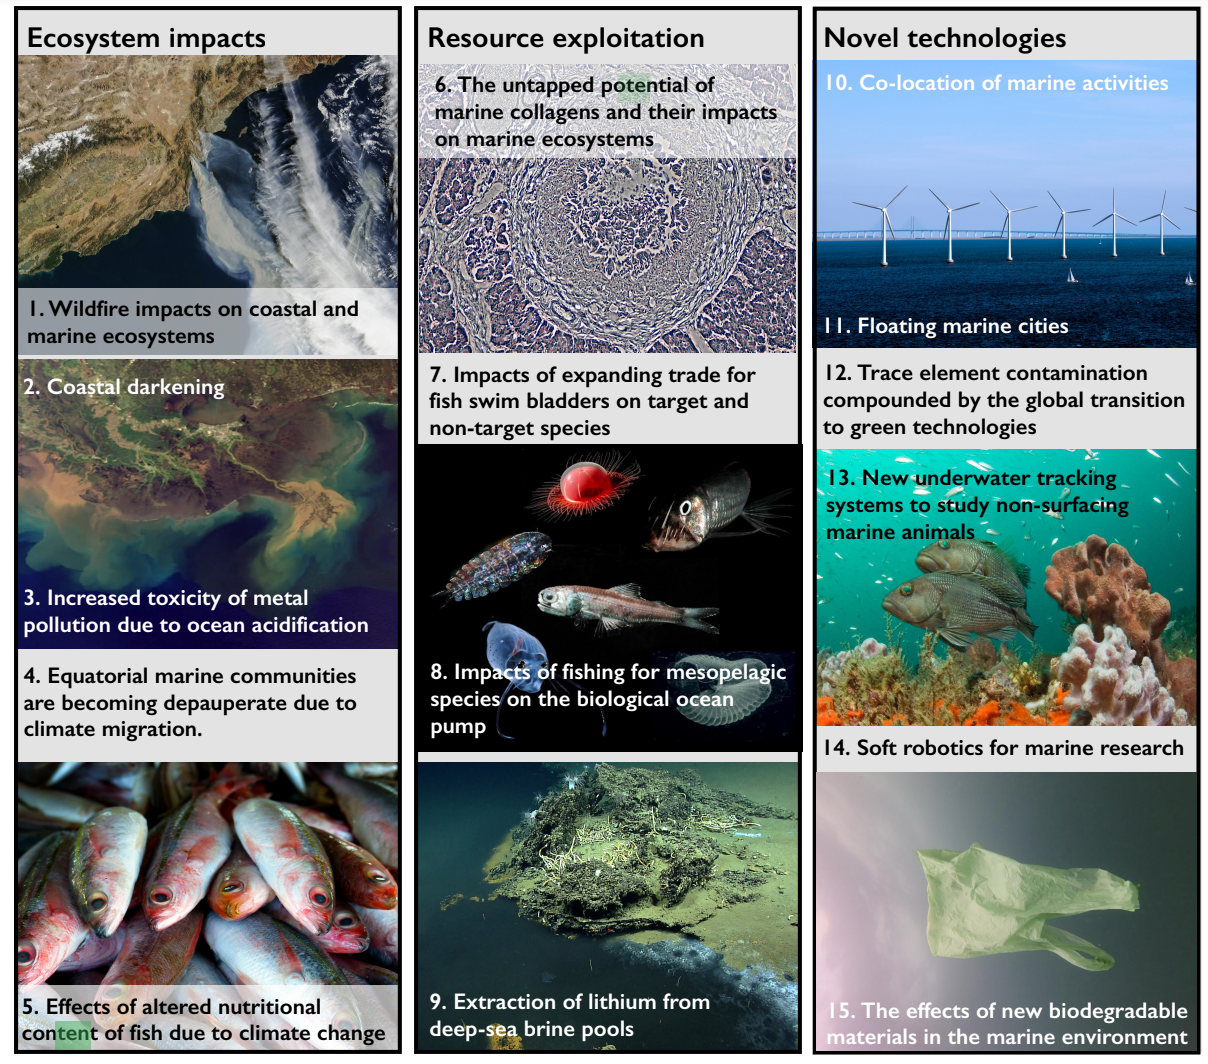 An international team of scientists have listed their top concerns for the global ocean